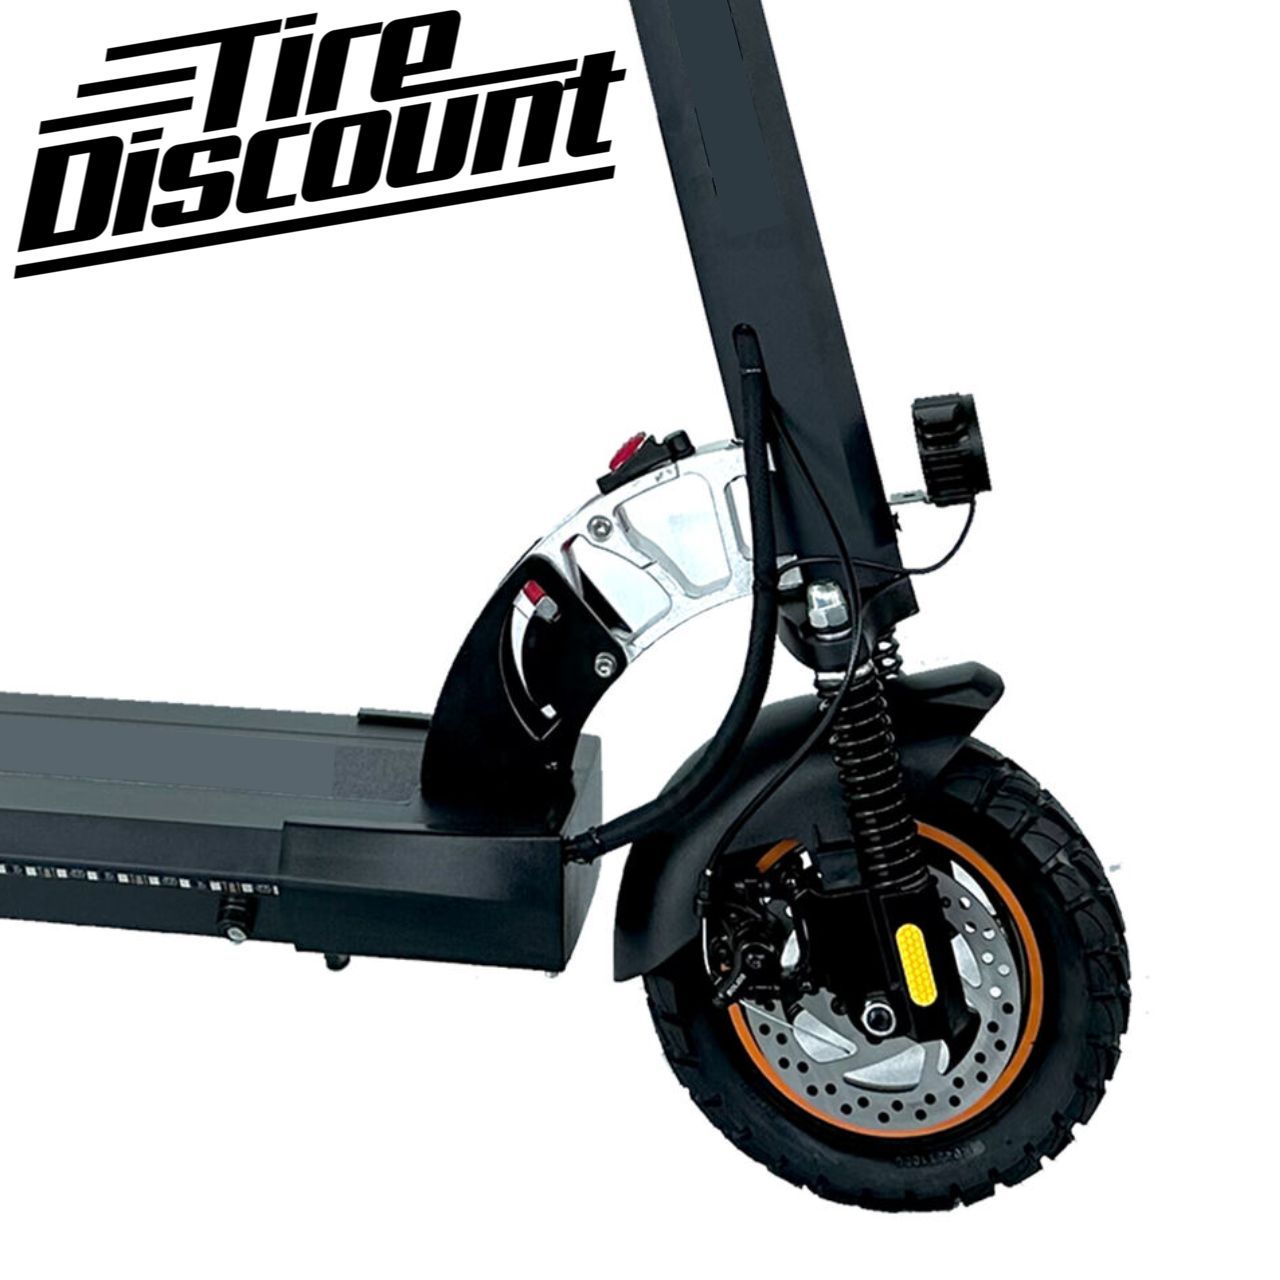 a close up of an electric scooter with a large wheel